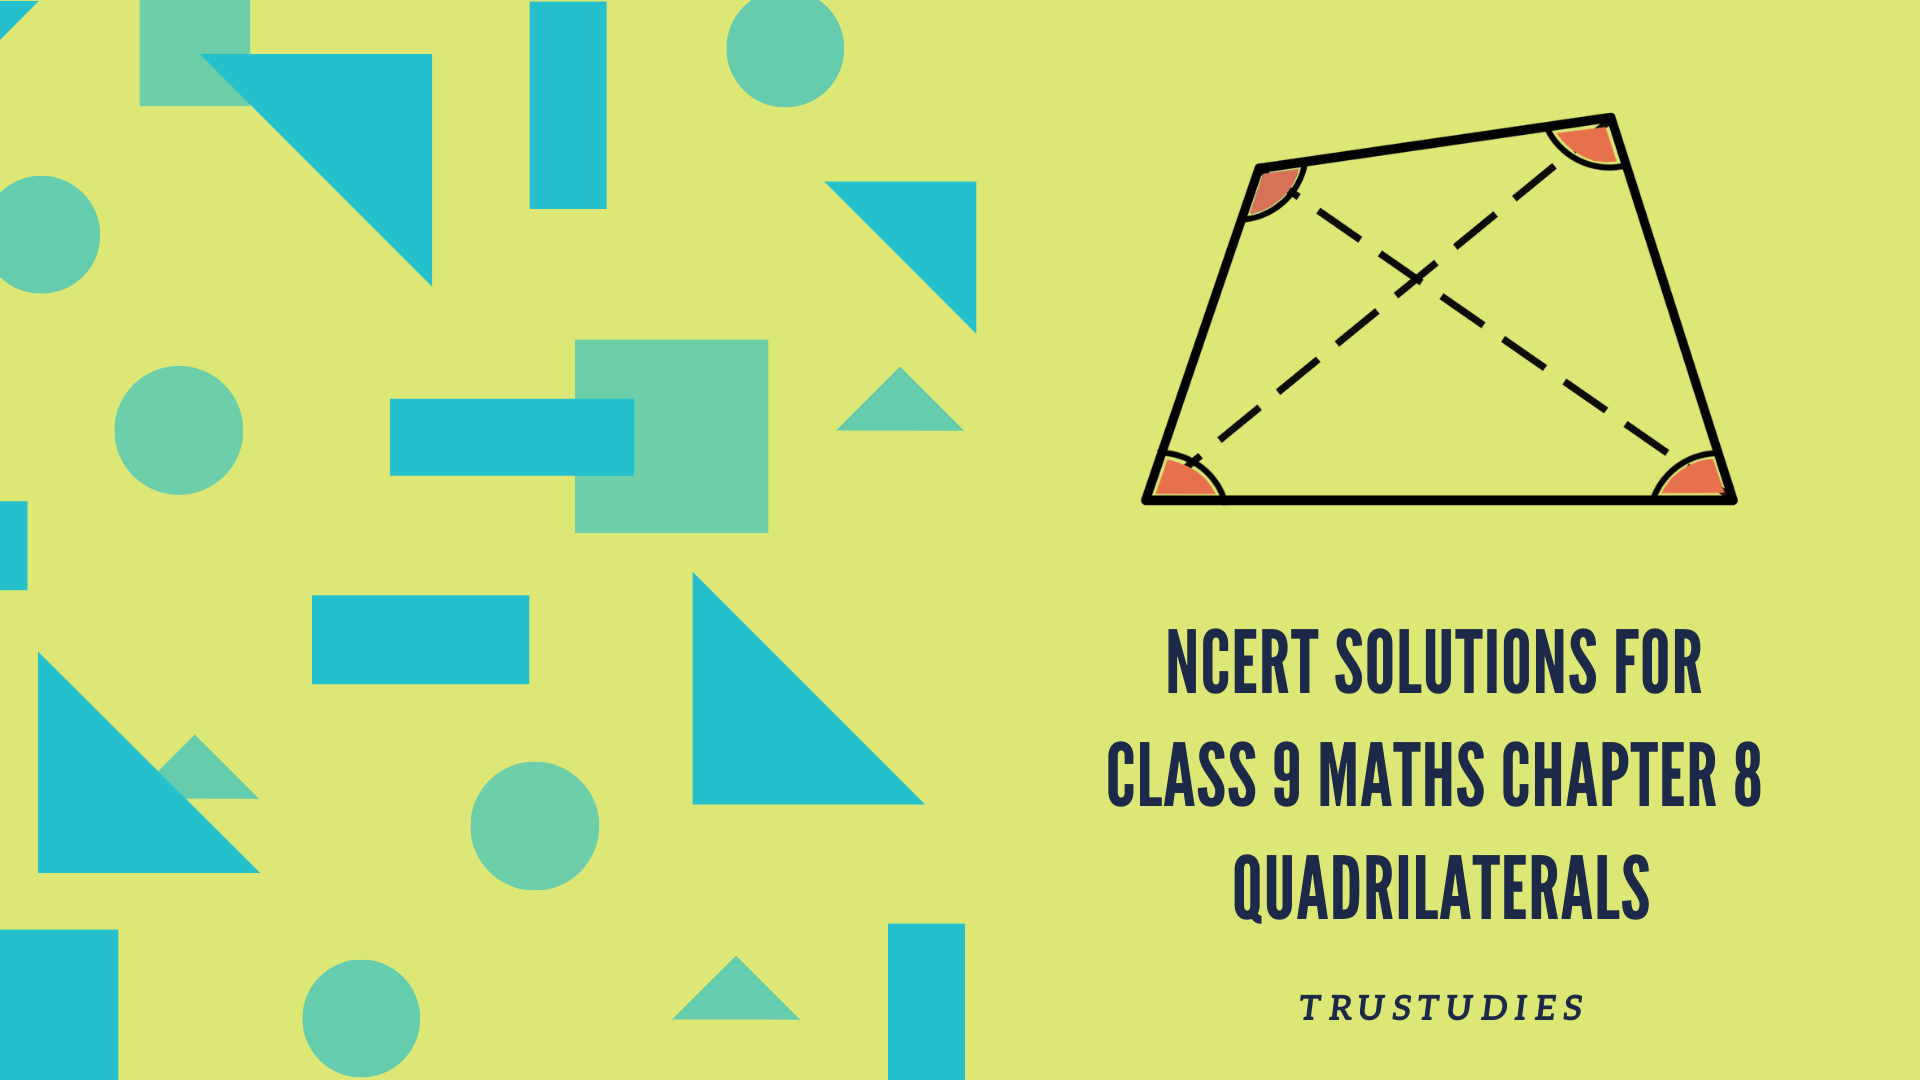 NCERT solutions for class 9 maths chapter 8 quadrilaterals banner image